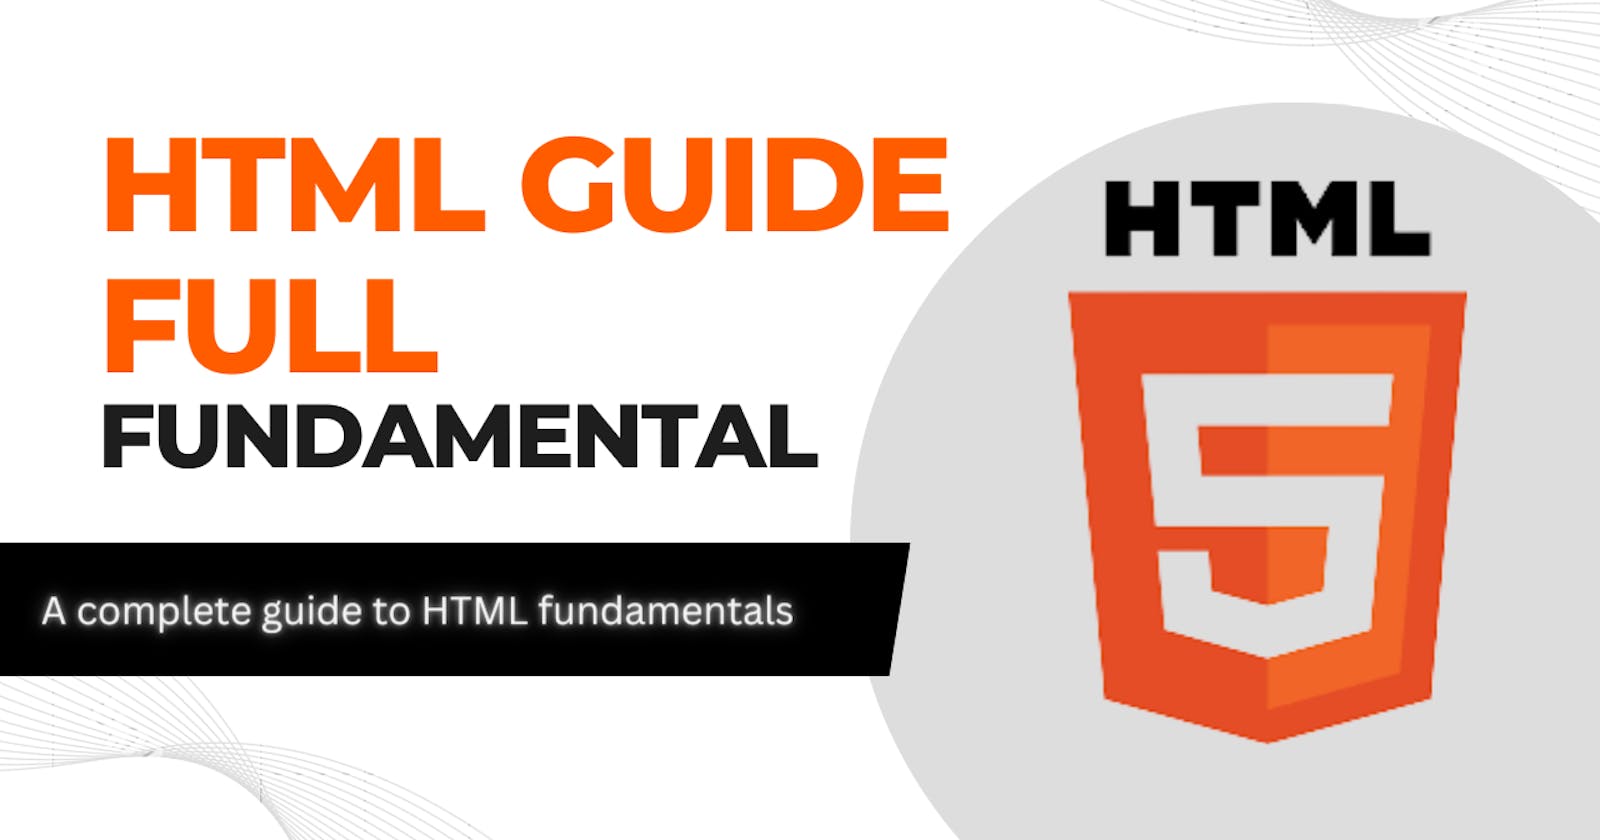 A complete guide to HTML fundamentals